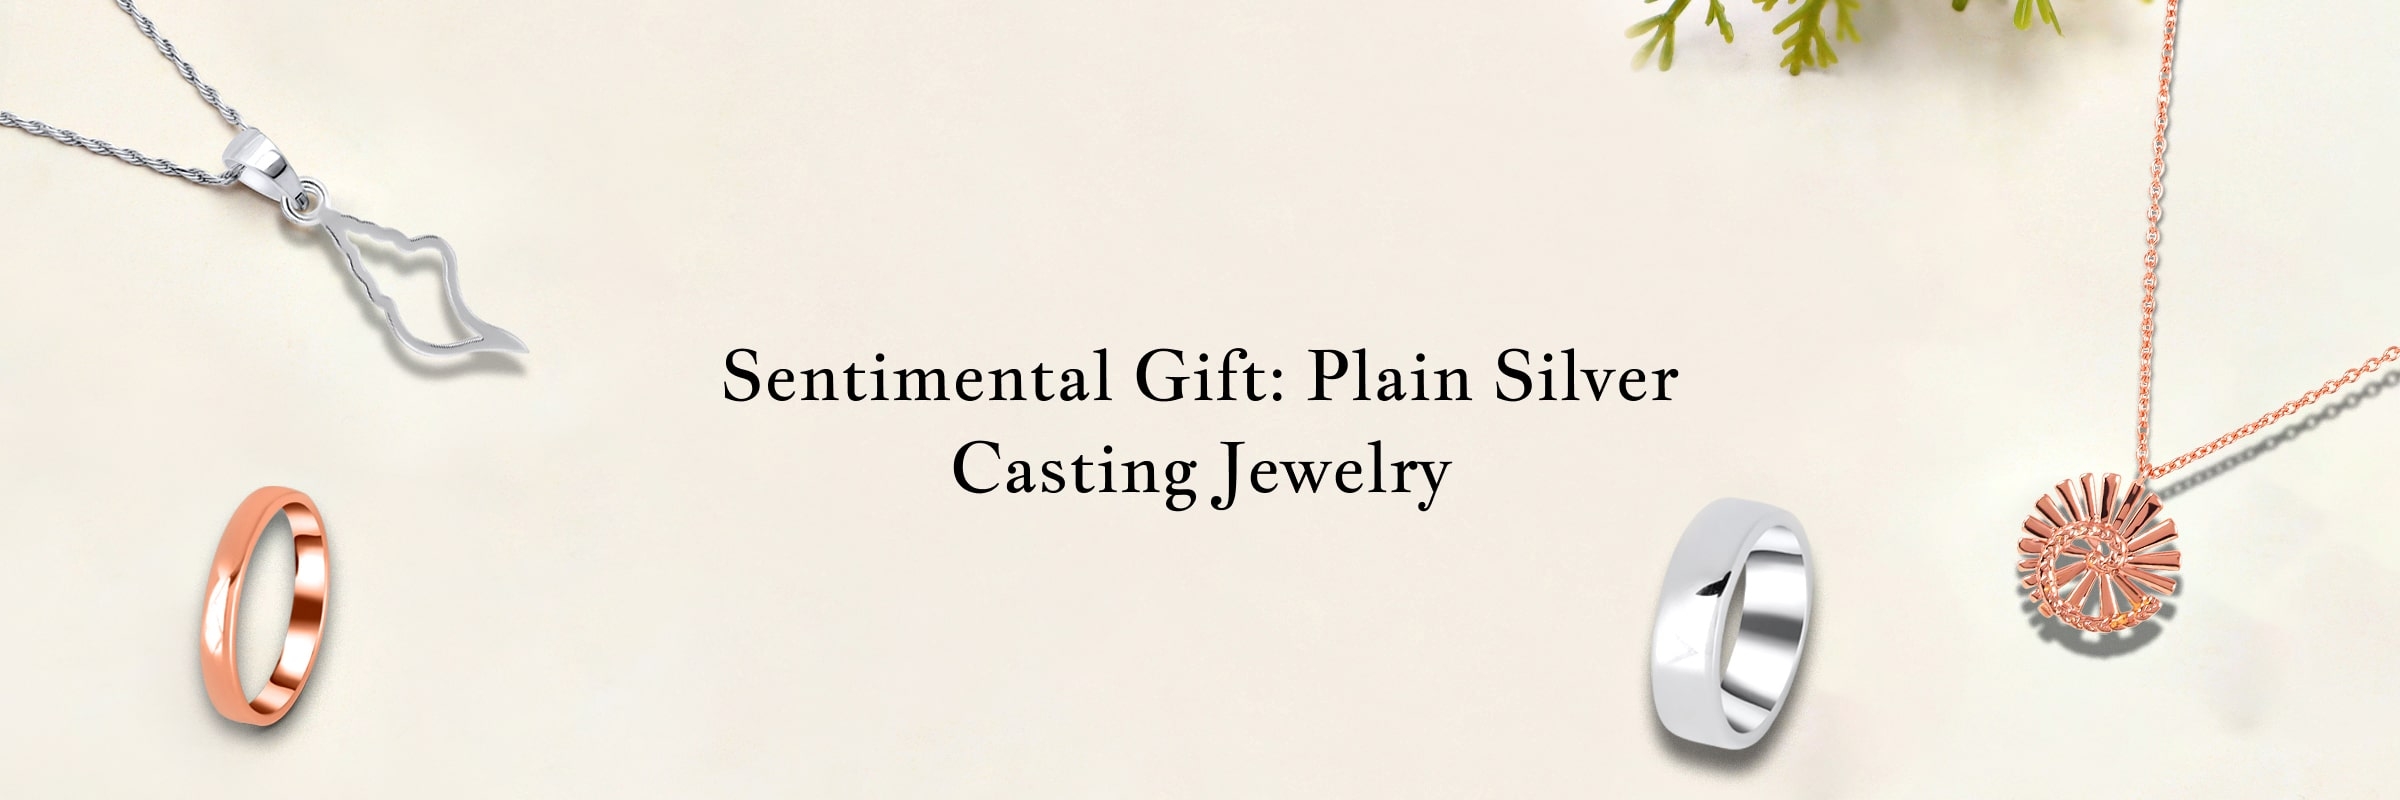 Plain Silver Casting Jewelry - The Perfect Gift for Capturing Sentiments